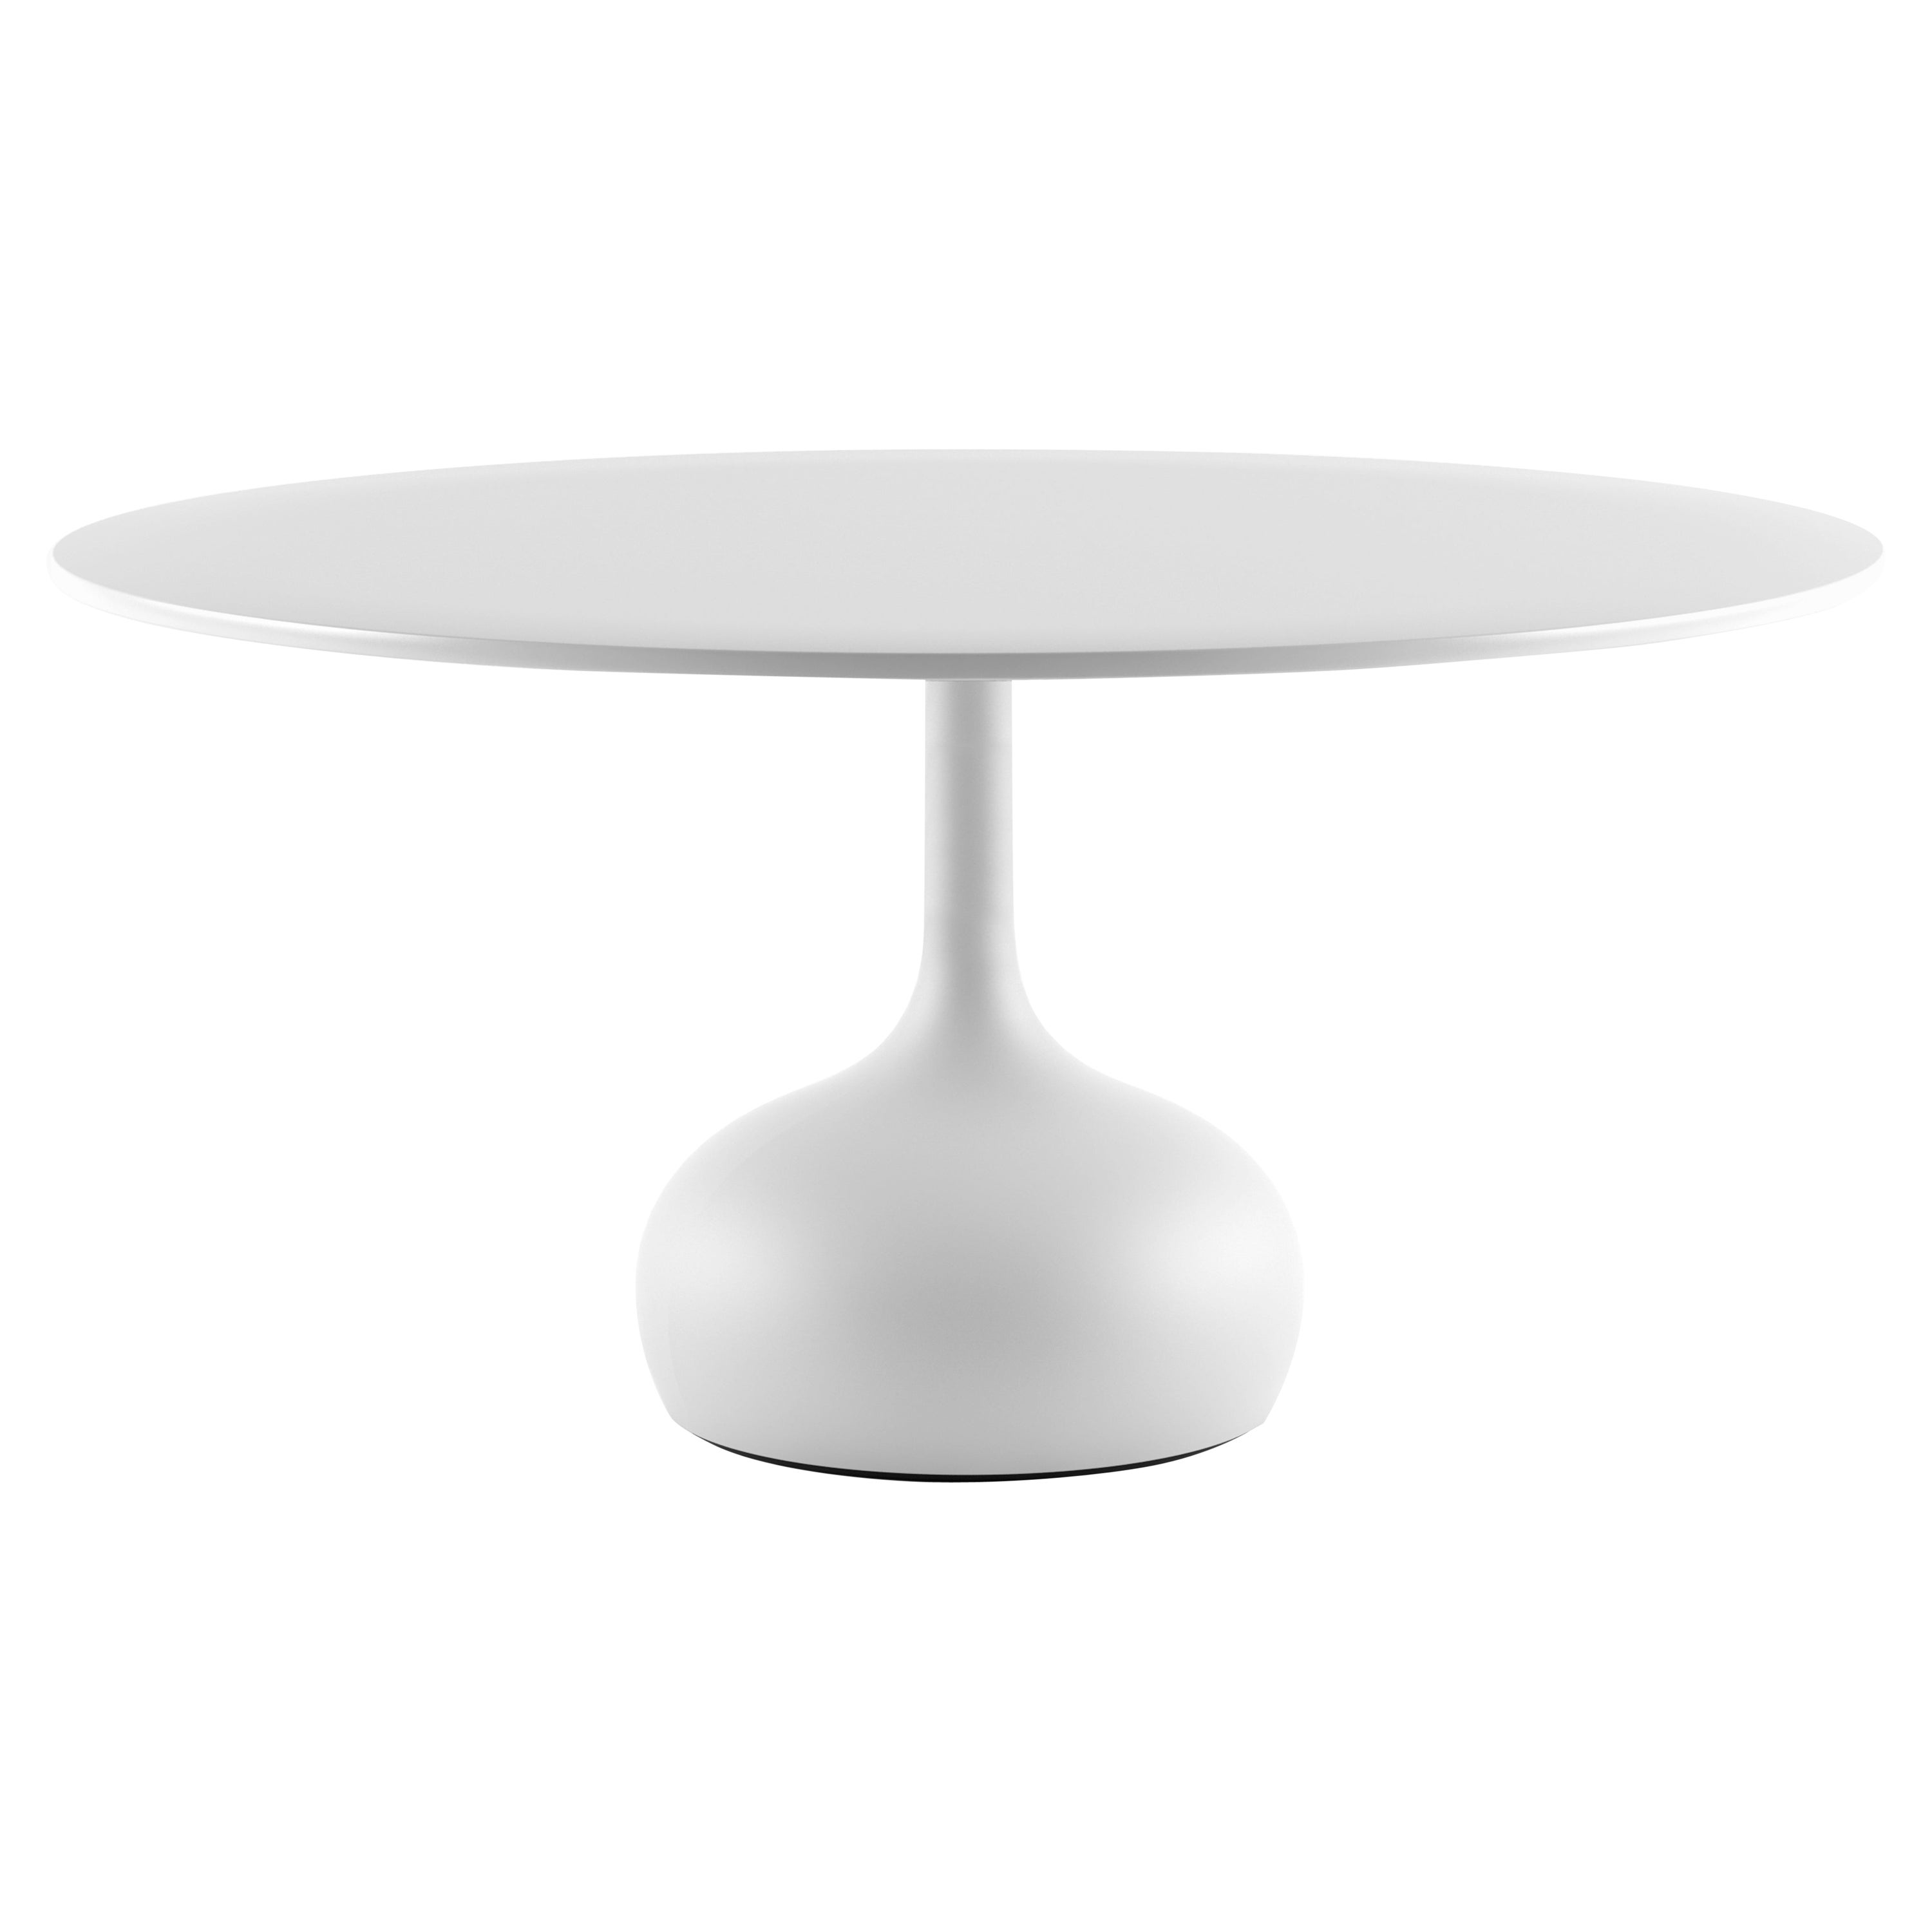 Alias 011 Saen Table Ø140 in White Lacquered MDF Top by Gabriele e Oscar Buratti For Sale